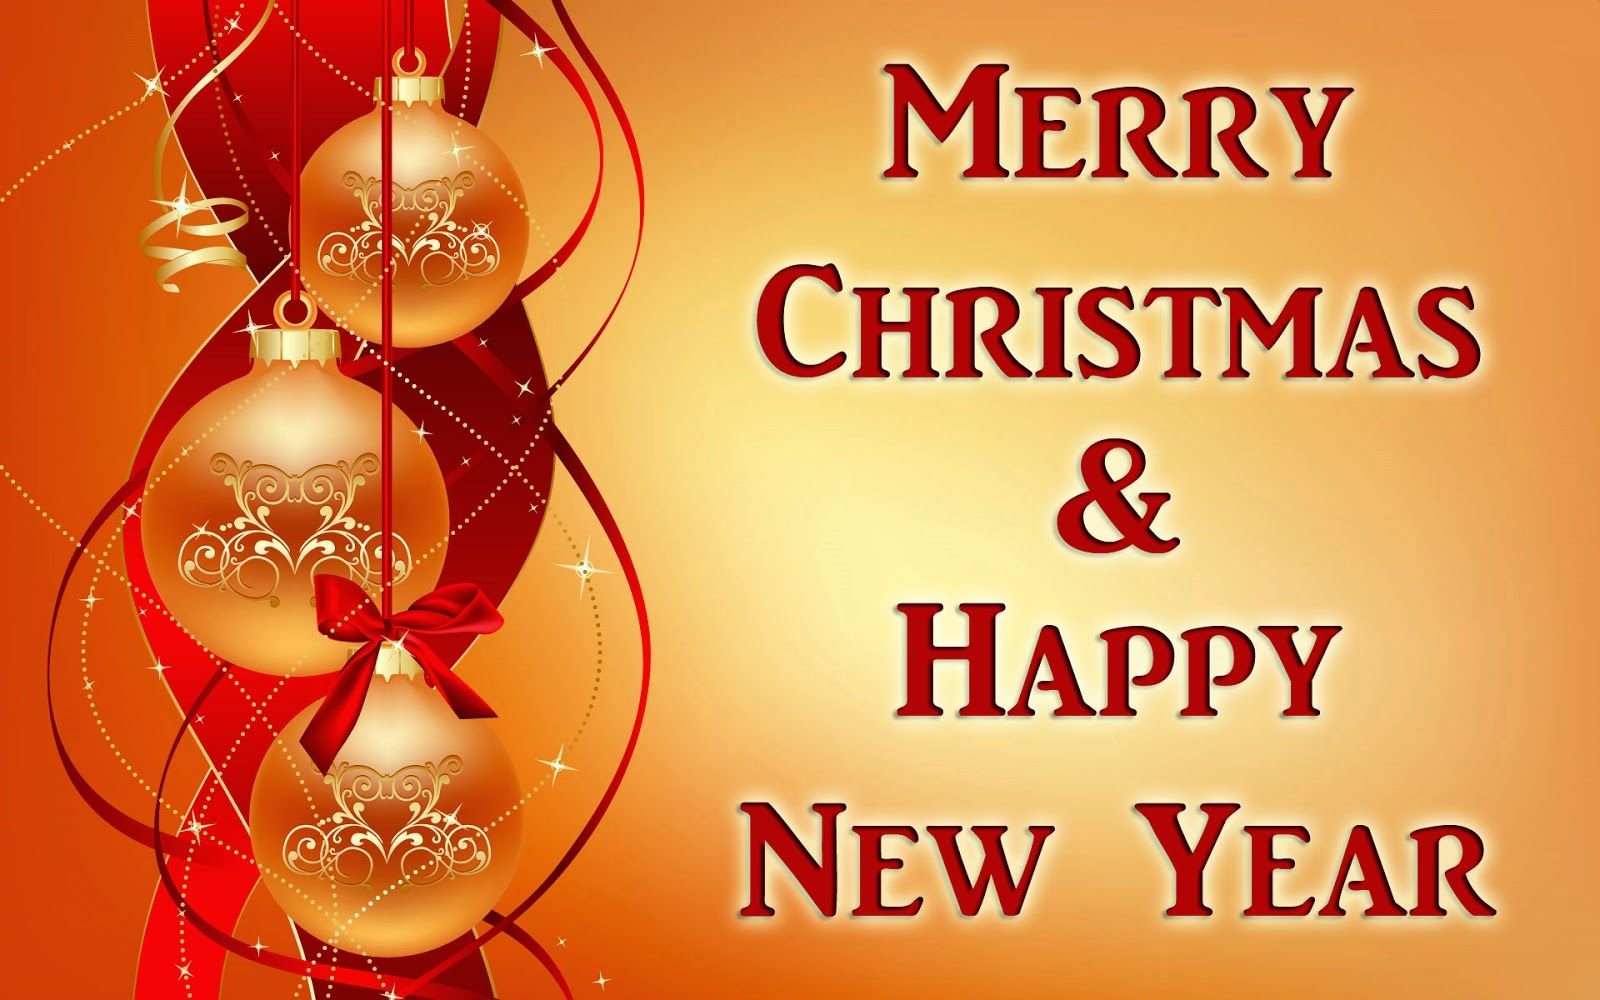 Merry Christmas. Merry Christmas and New year. Happy New year and Christmas. Christmas and New year Wishes.